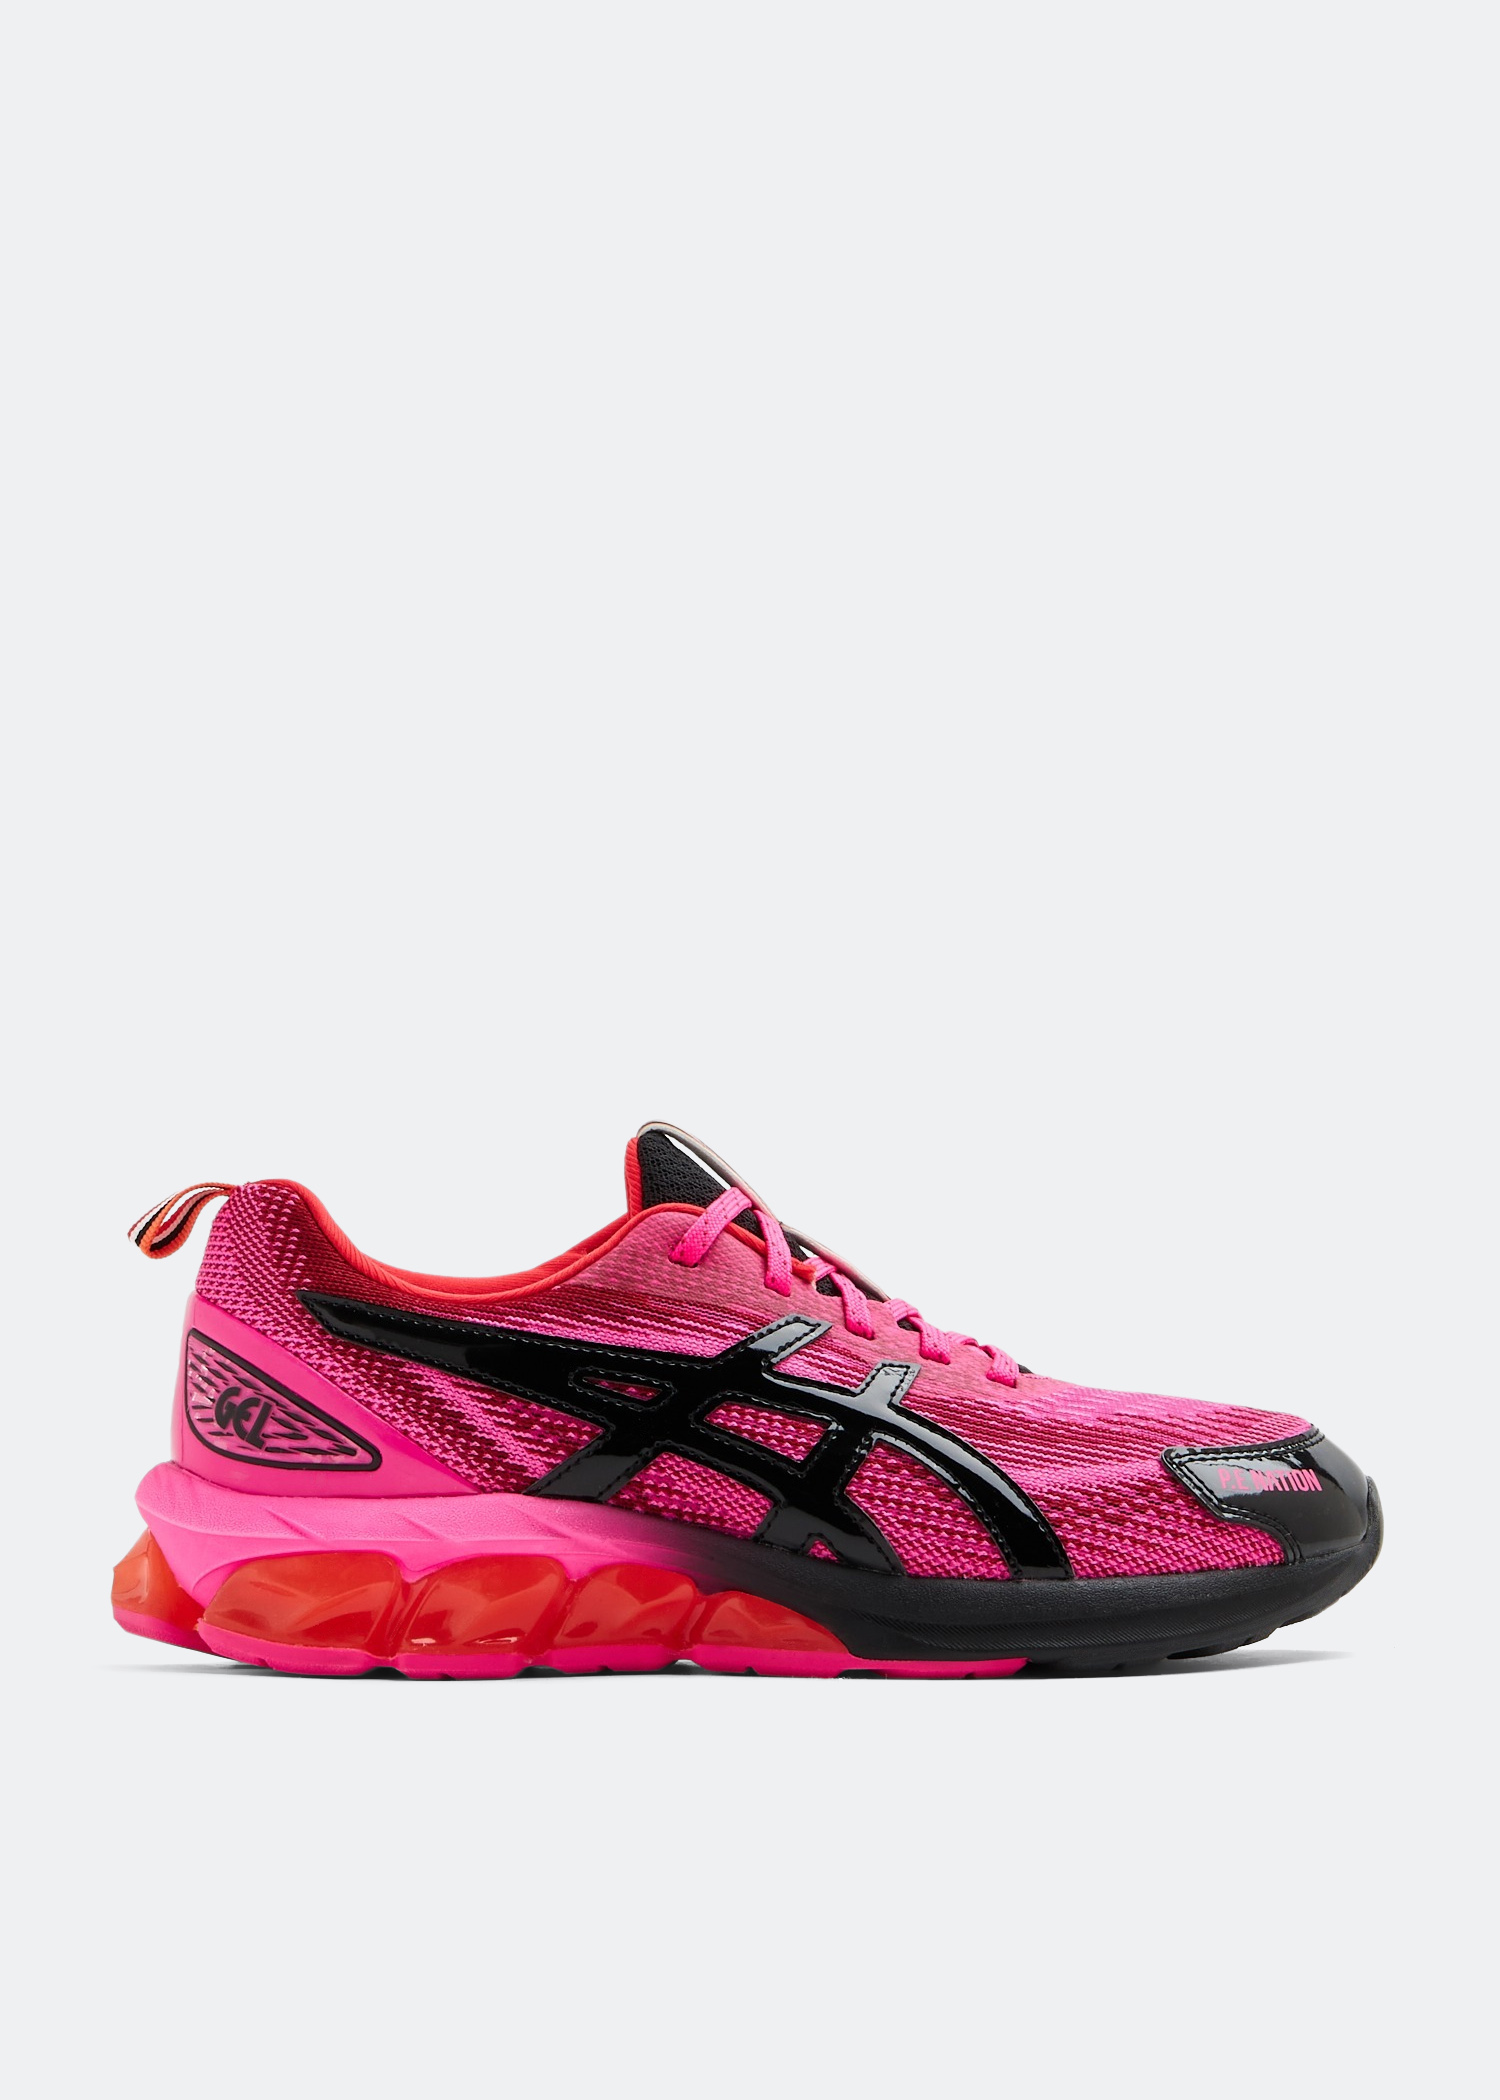 Asics x P.E. Nation Gel-Quantum 180 VII sneakers for Women - Pink 